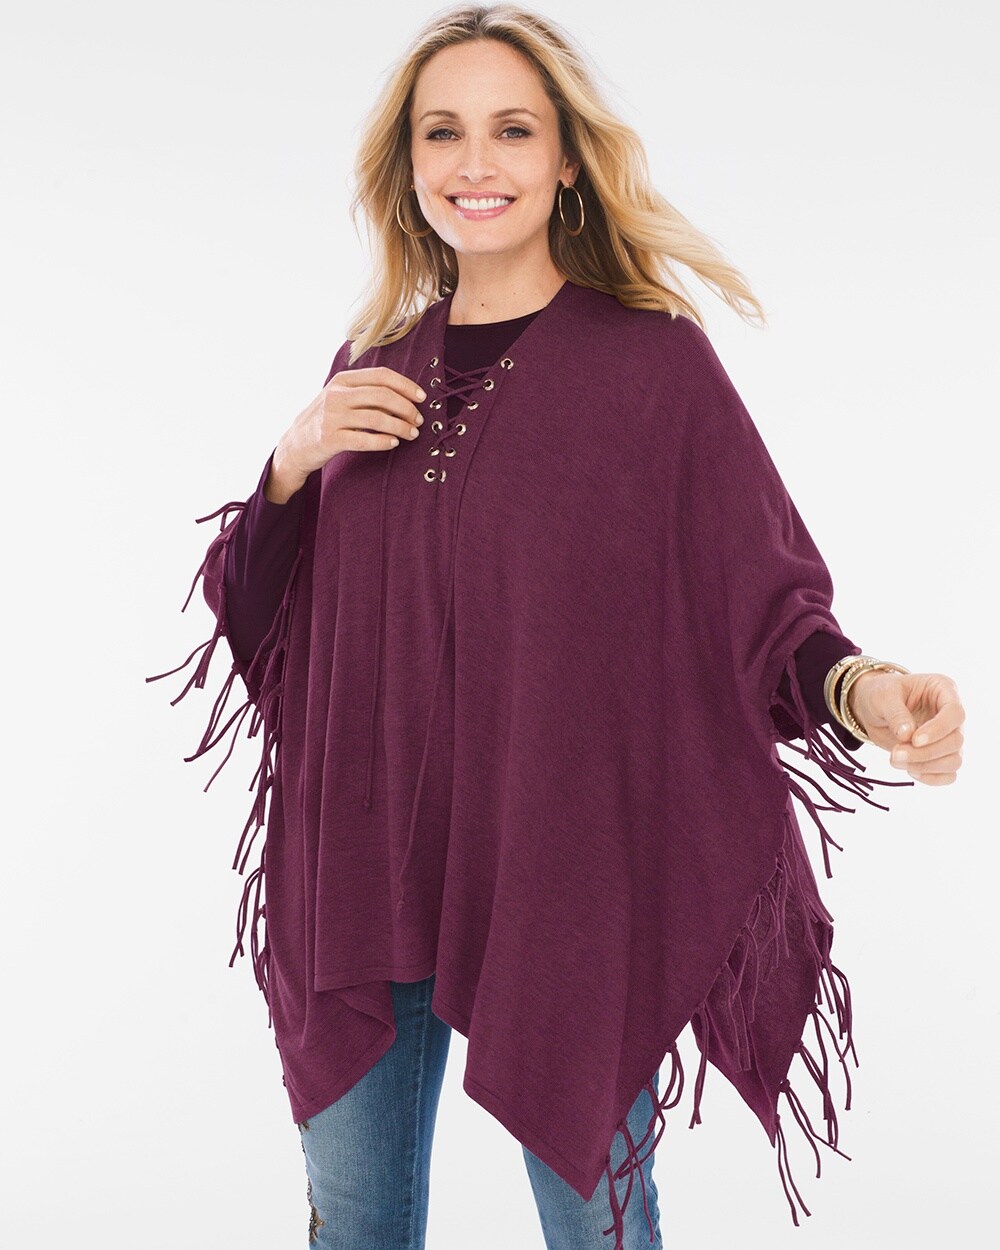 Lace-Up Fringe Poncho in Monrovia